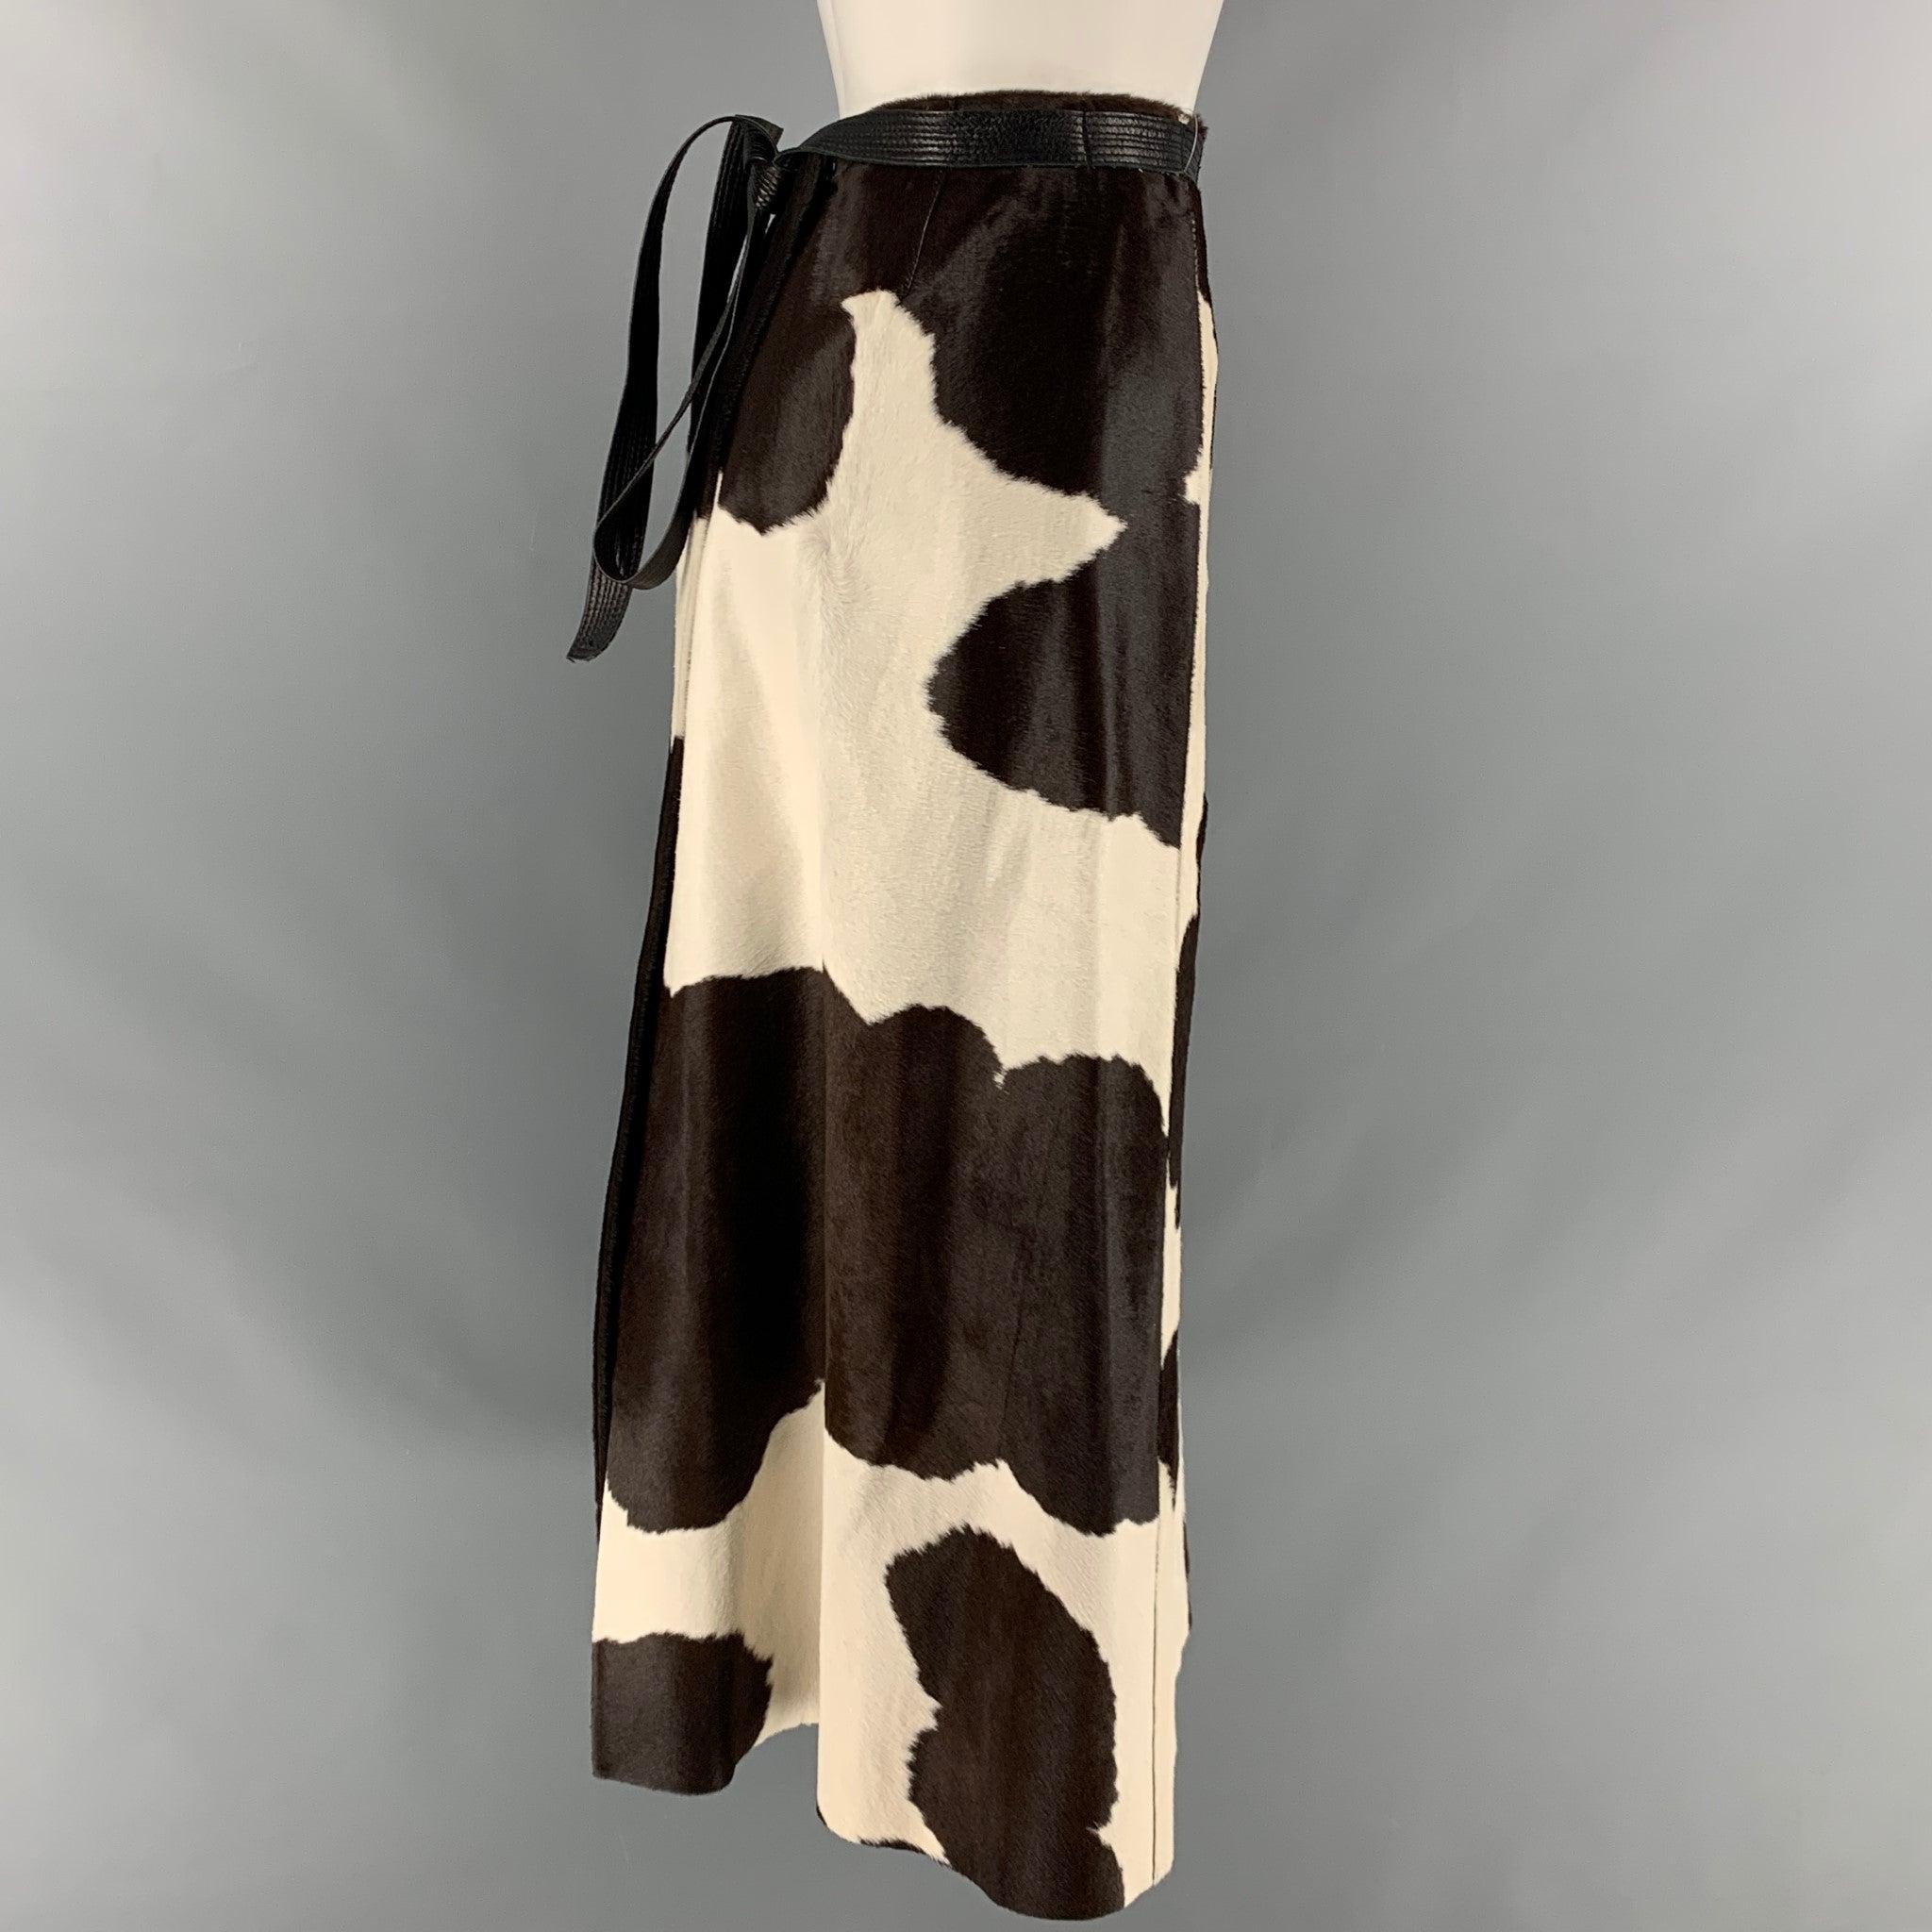 MARC JACOBS skirt comes in a brown and cream calf hair leather featuring a wrap style, leather belt, and frontal pockets. Made in US.Very Good Pre- Owned Conditions. 

Marked:   6 

Measurements: 
  Waist: 30 inches Hip: 40 inches Length: 32 inches